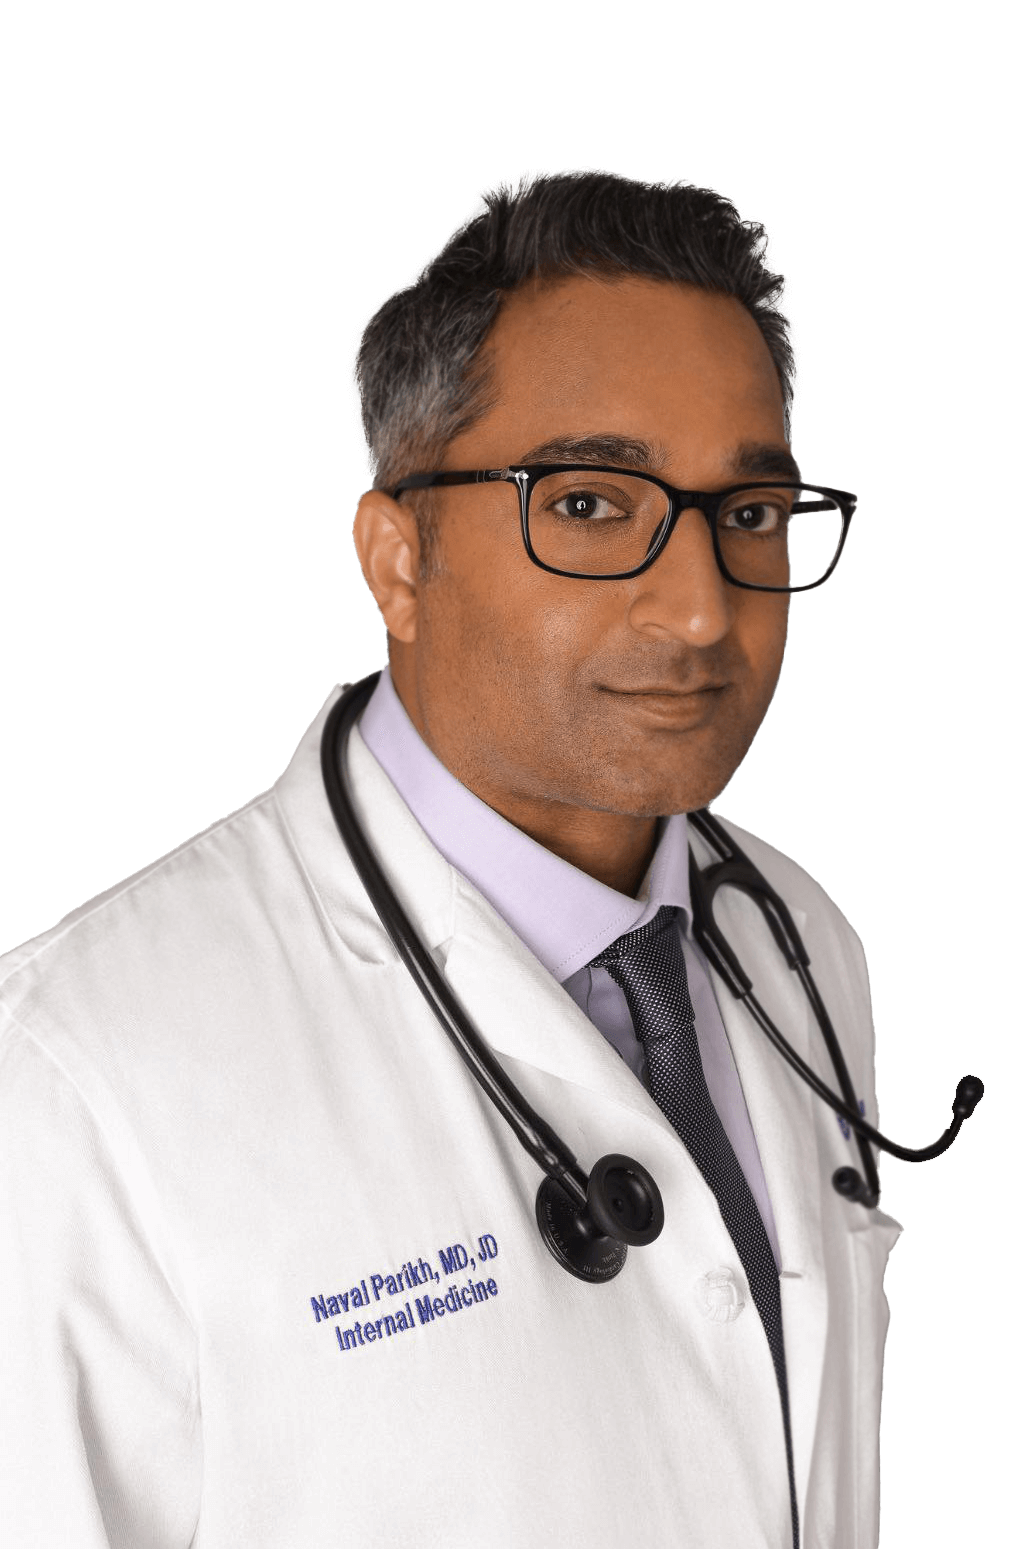 South Florida Primary Care Physician